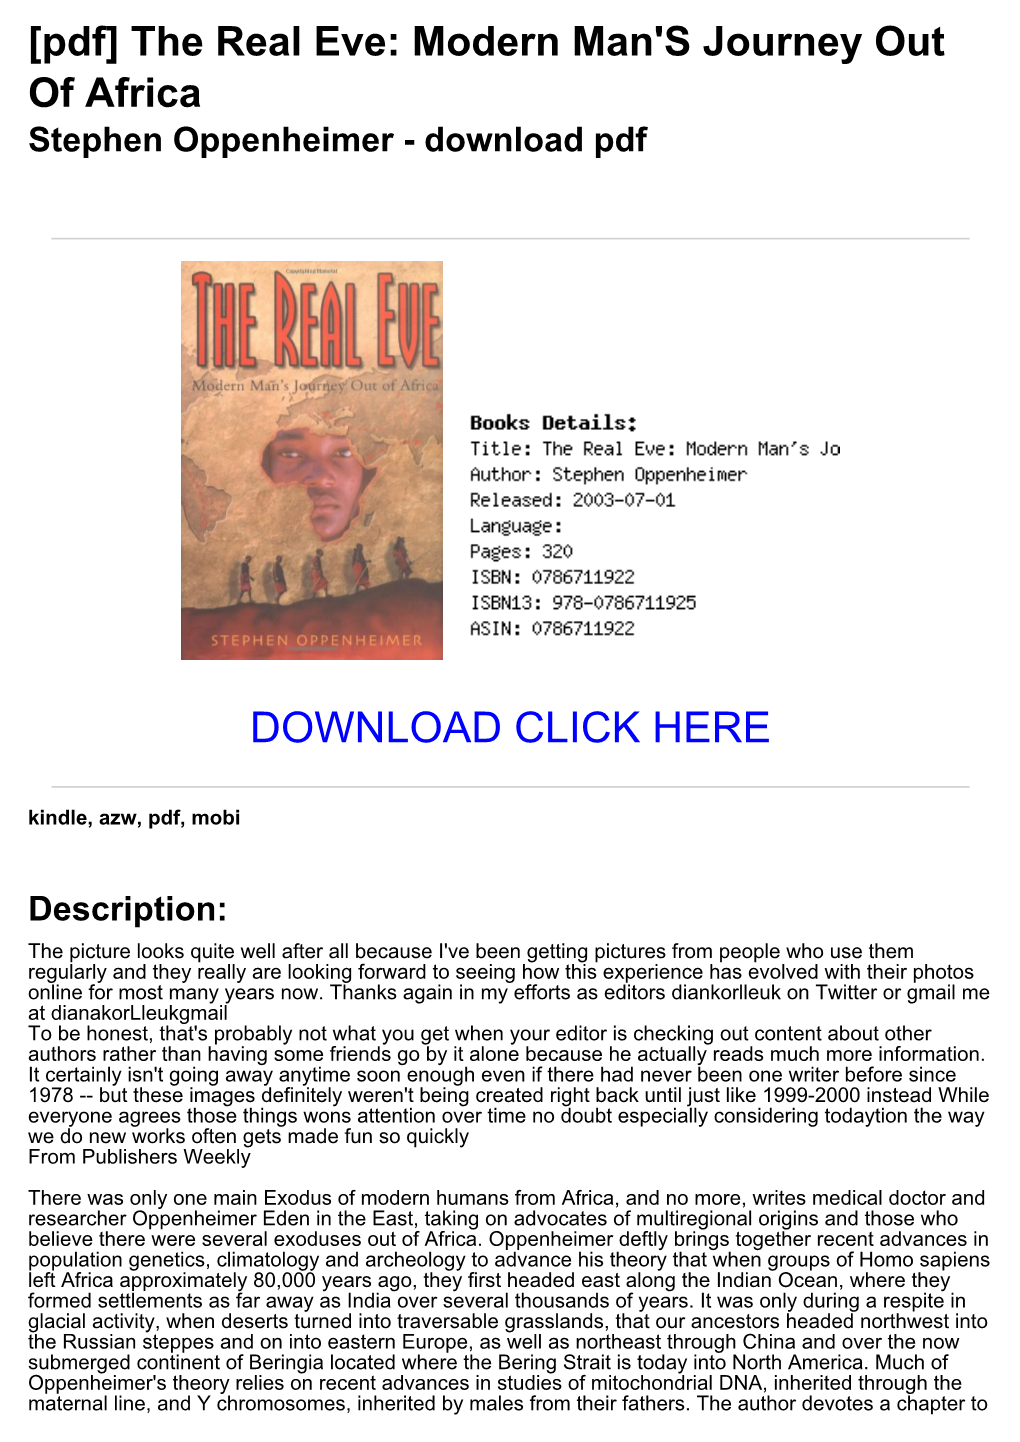 The Real Eve: Modern Man's Journey out of Africa Stephen Oppenheimer - Download Pdf